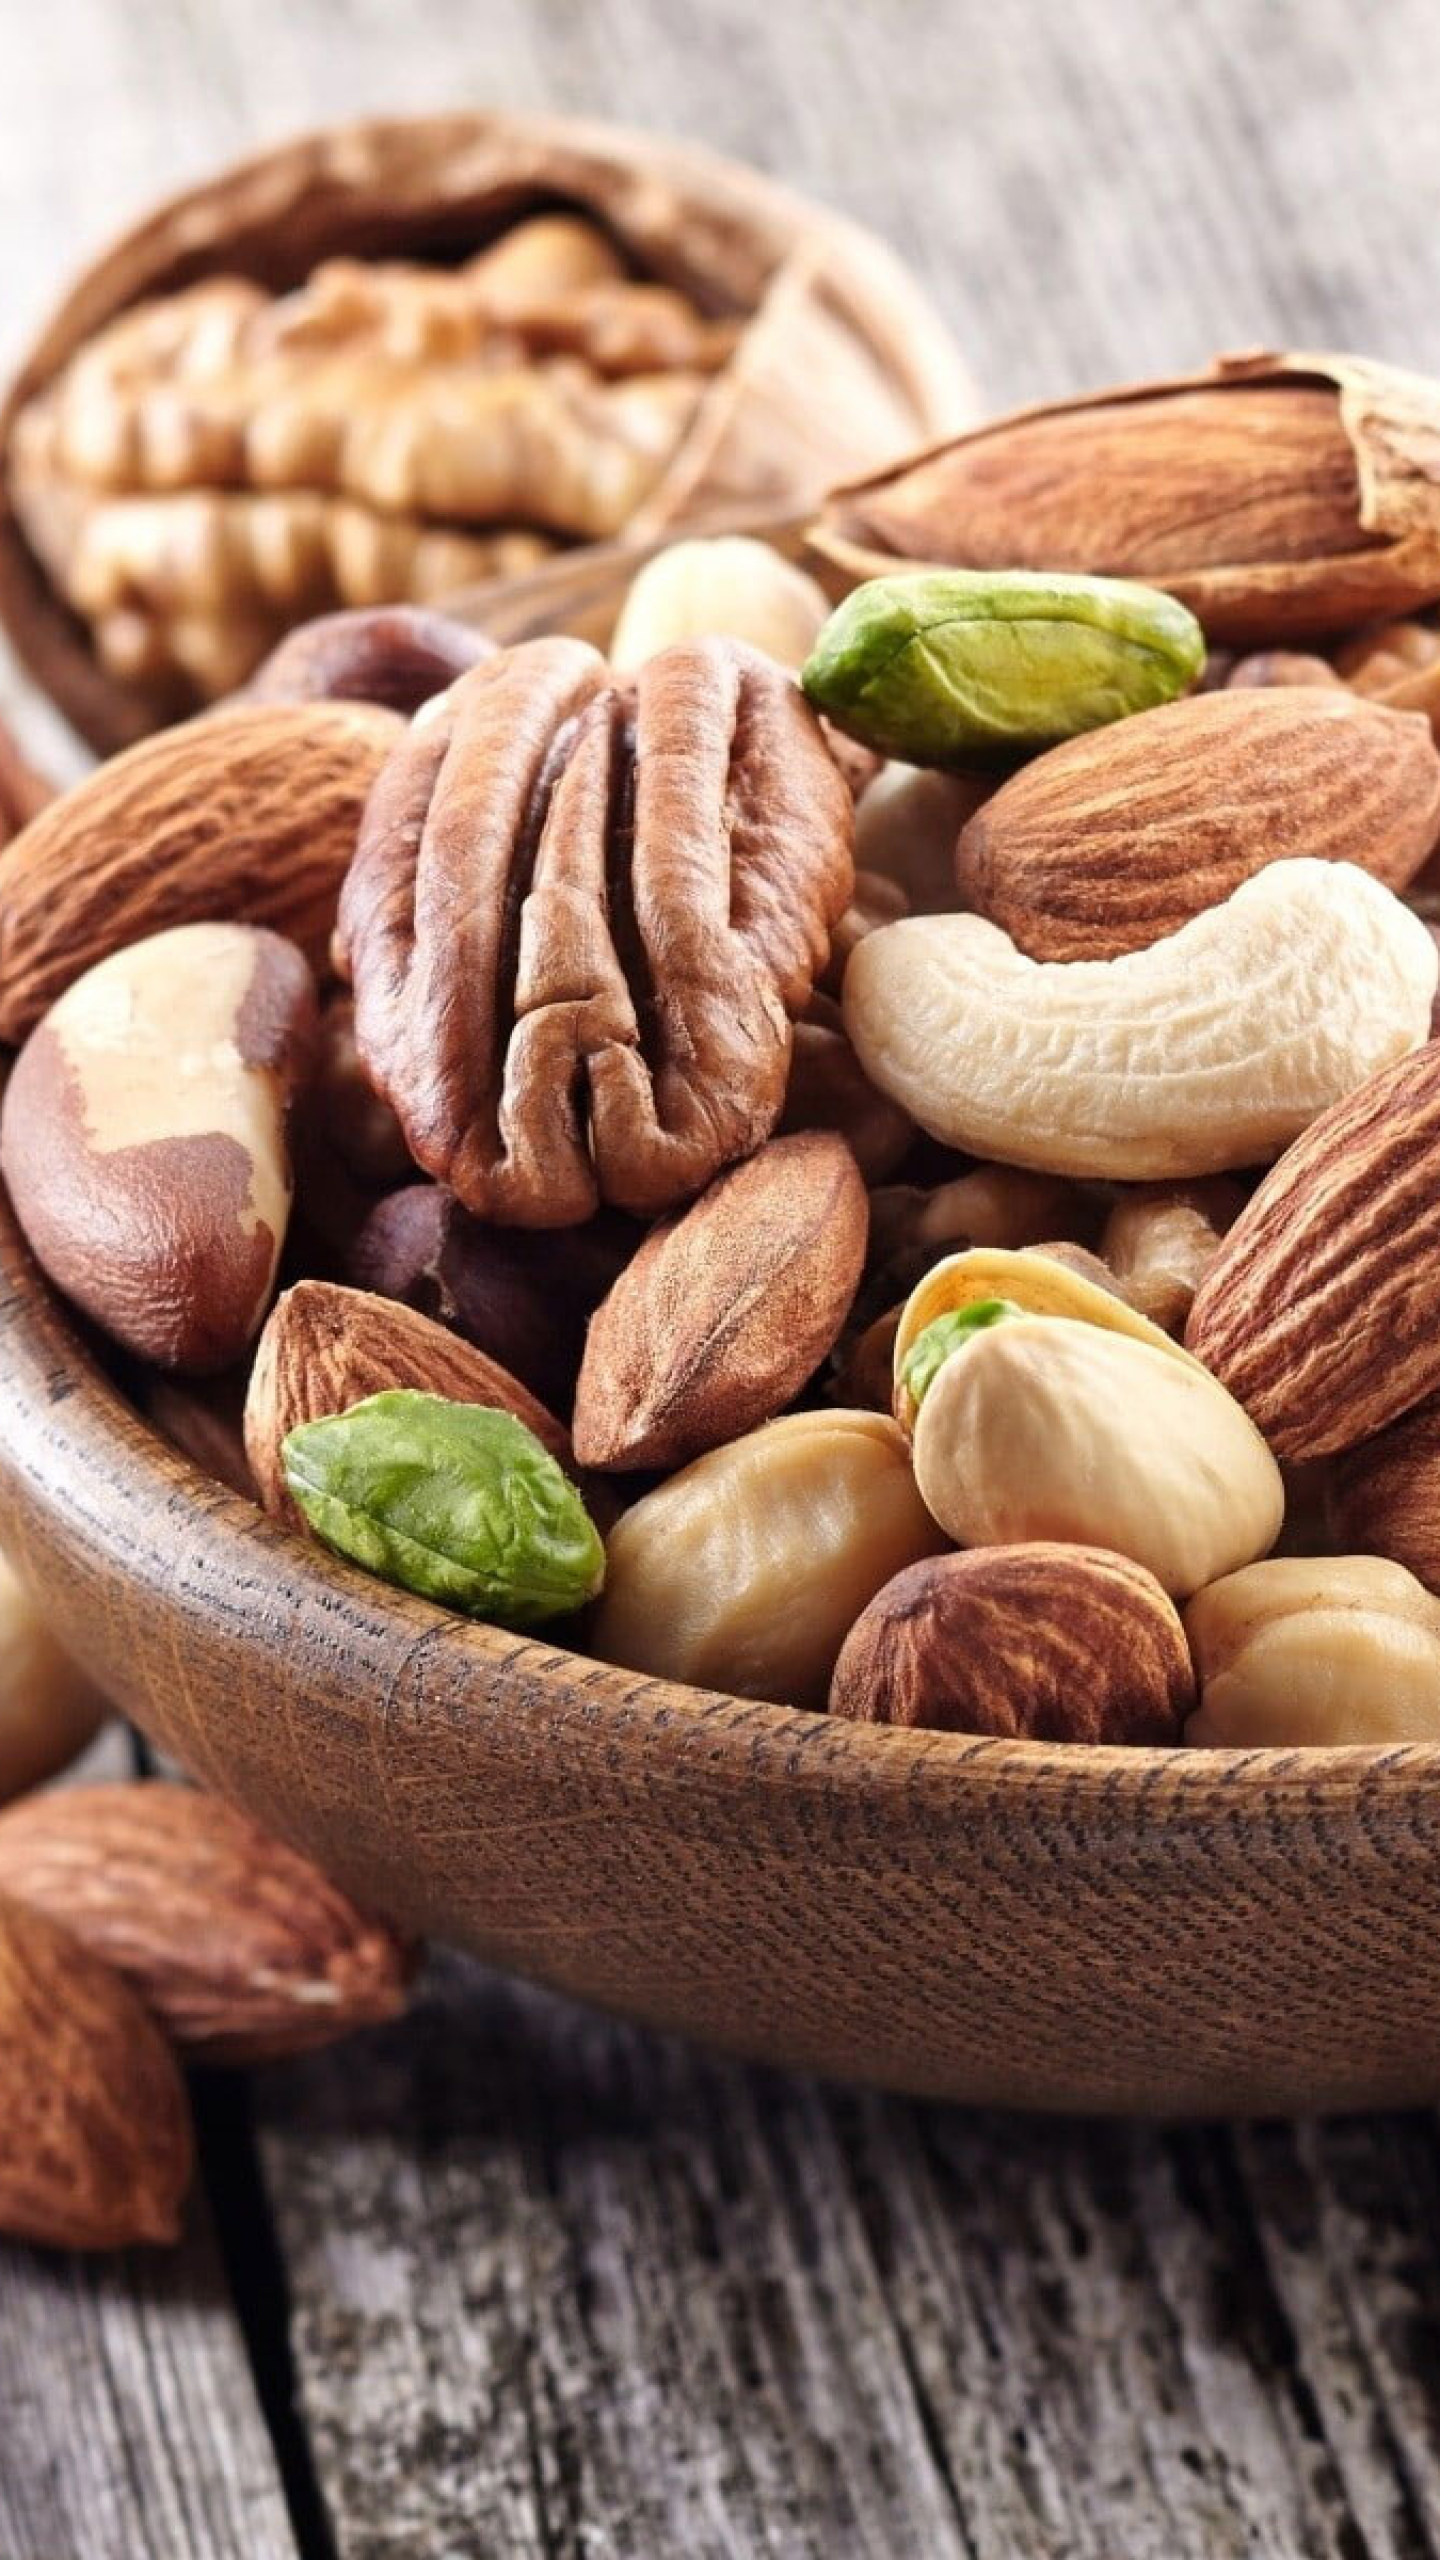 Nuts: Raw food, packed with vitamins, minerals, protein and good fats. 1440x2560 HD Background.